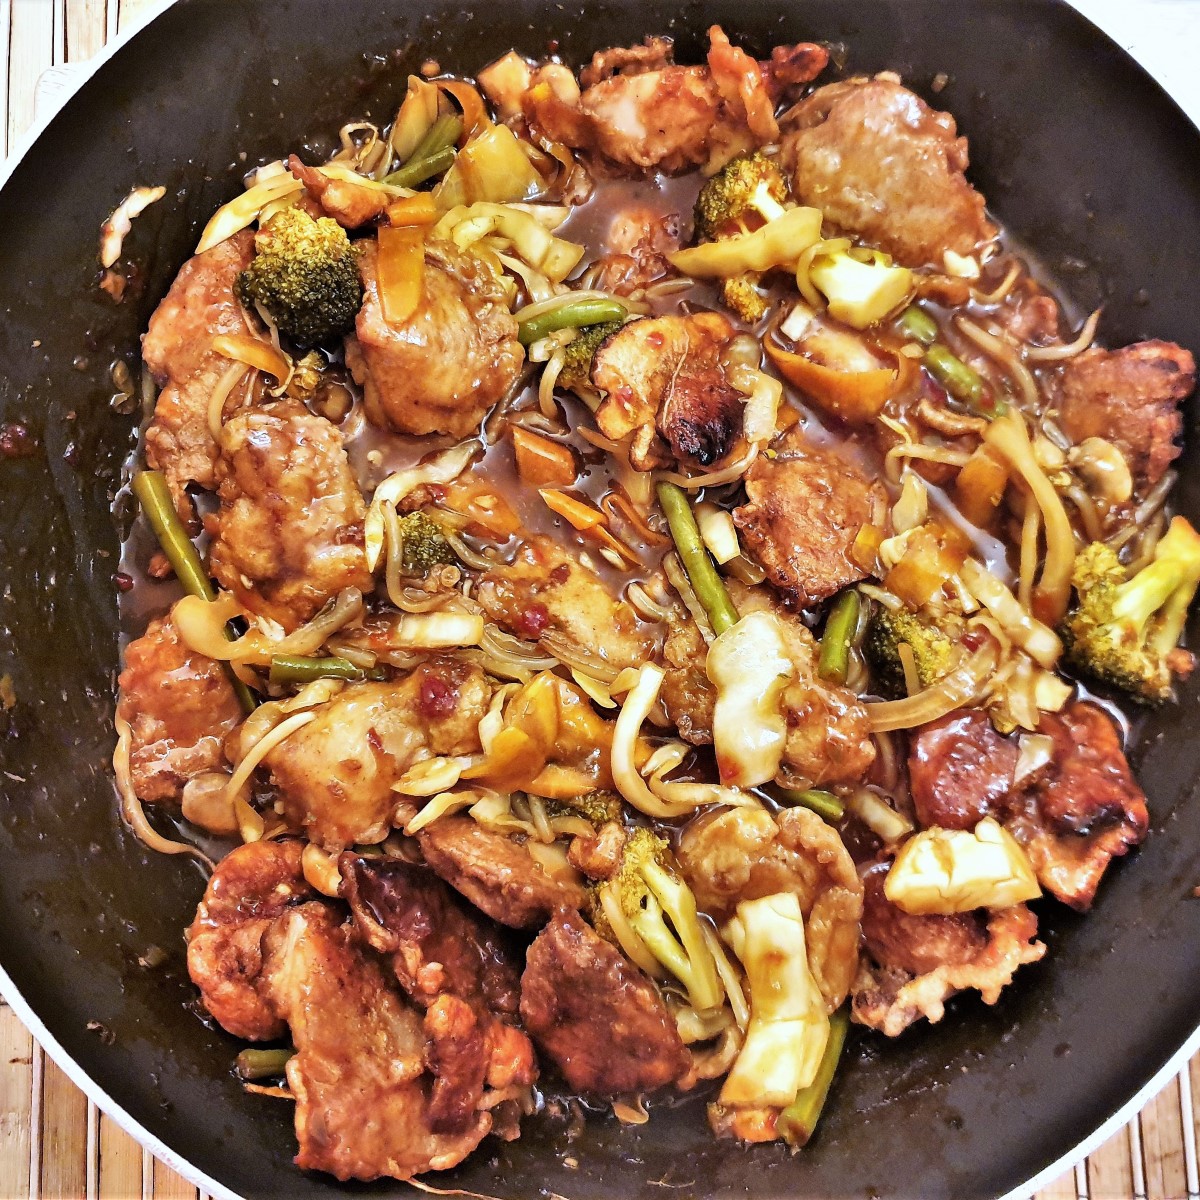 Chicken and vegetables in a wok.